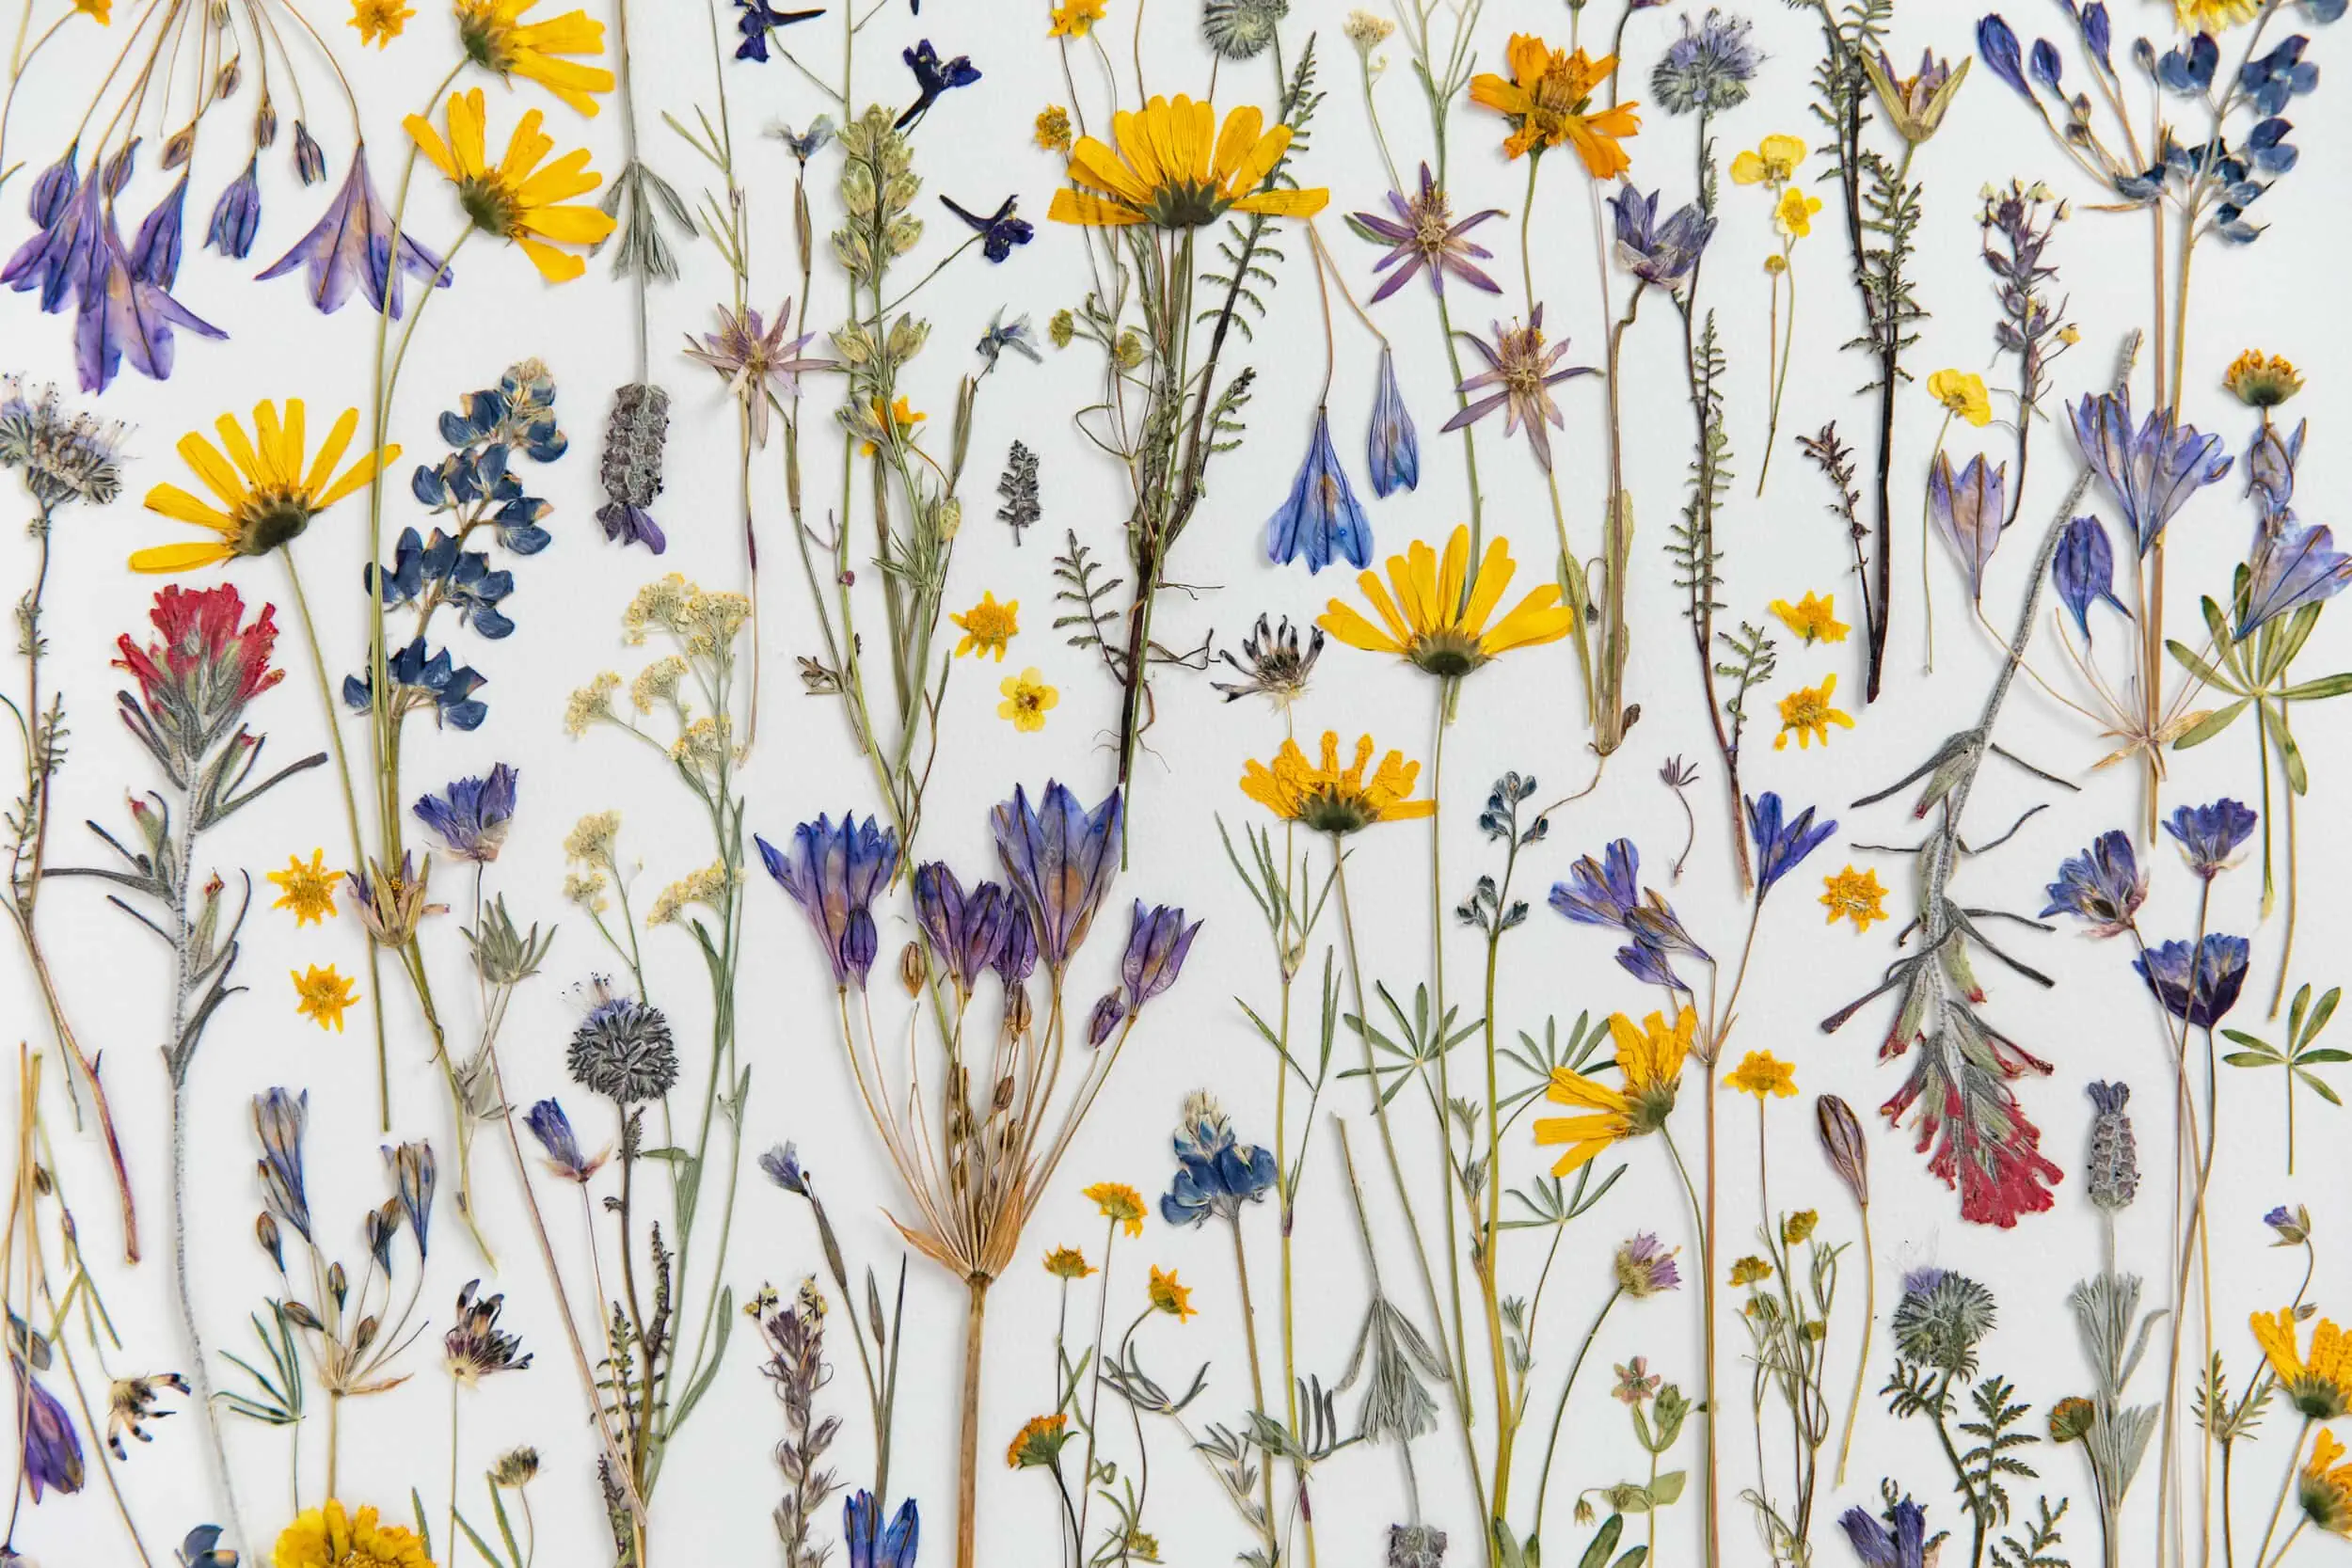 Yellow, purple, and red pressed flowers on a white background